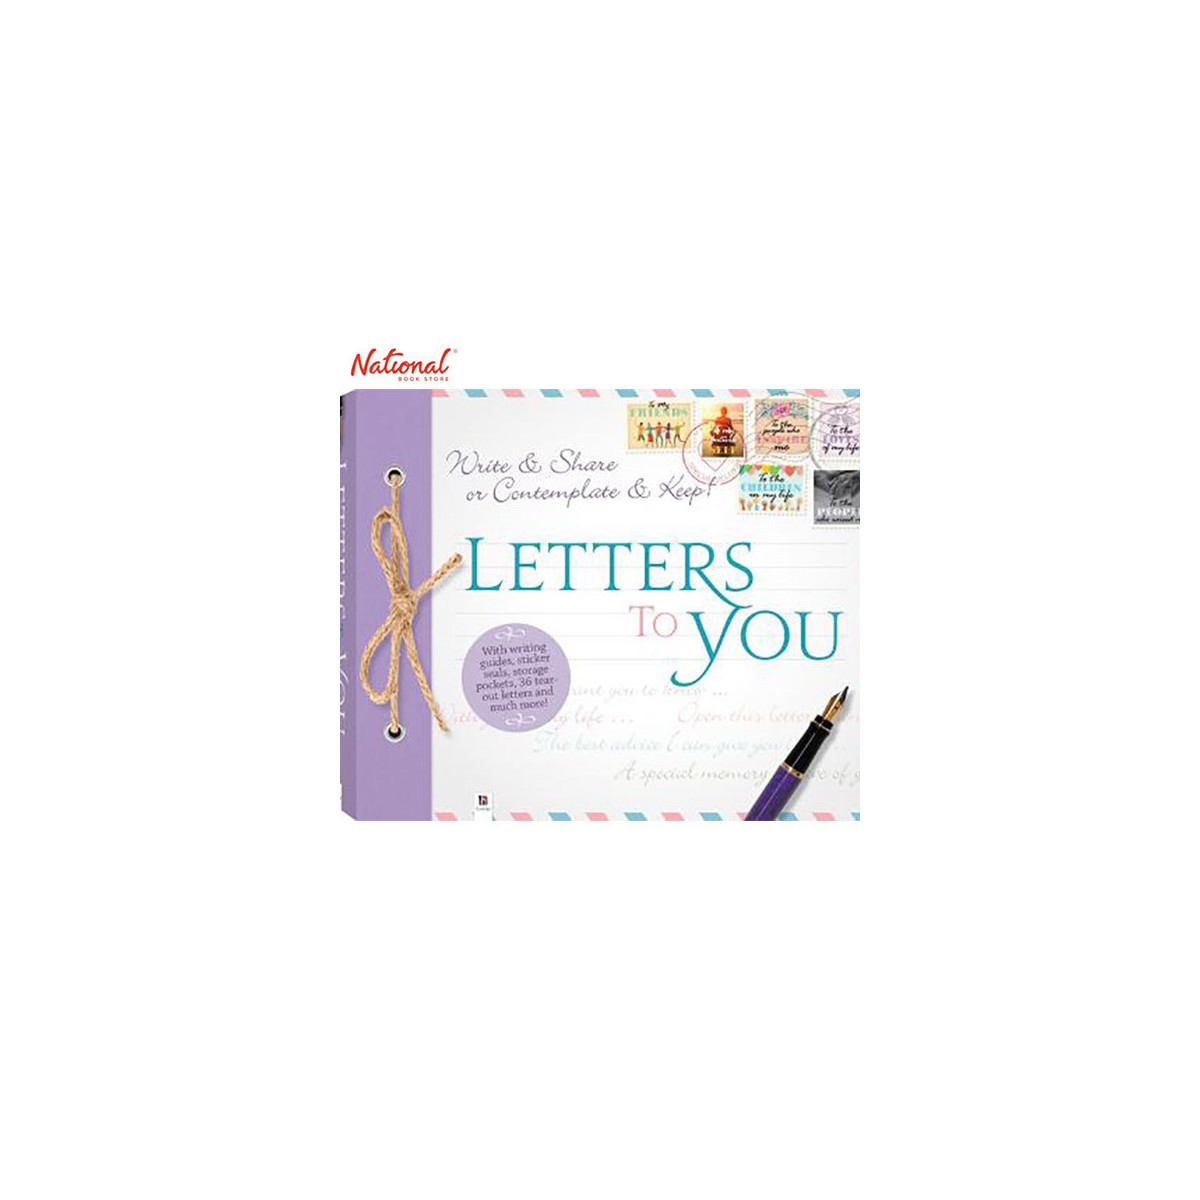 LETTERS TO YOU HARDCOVER